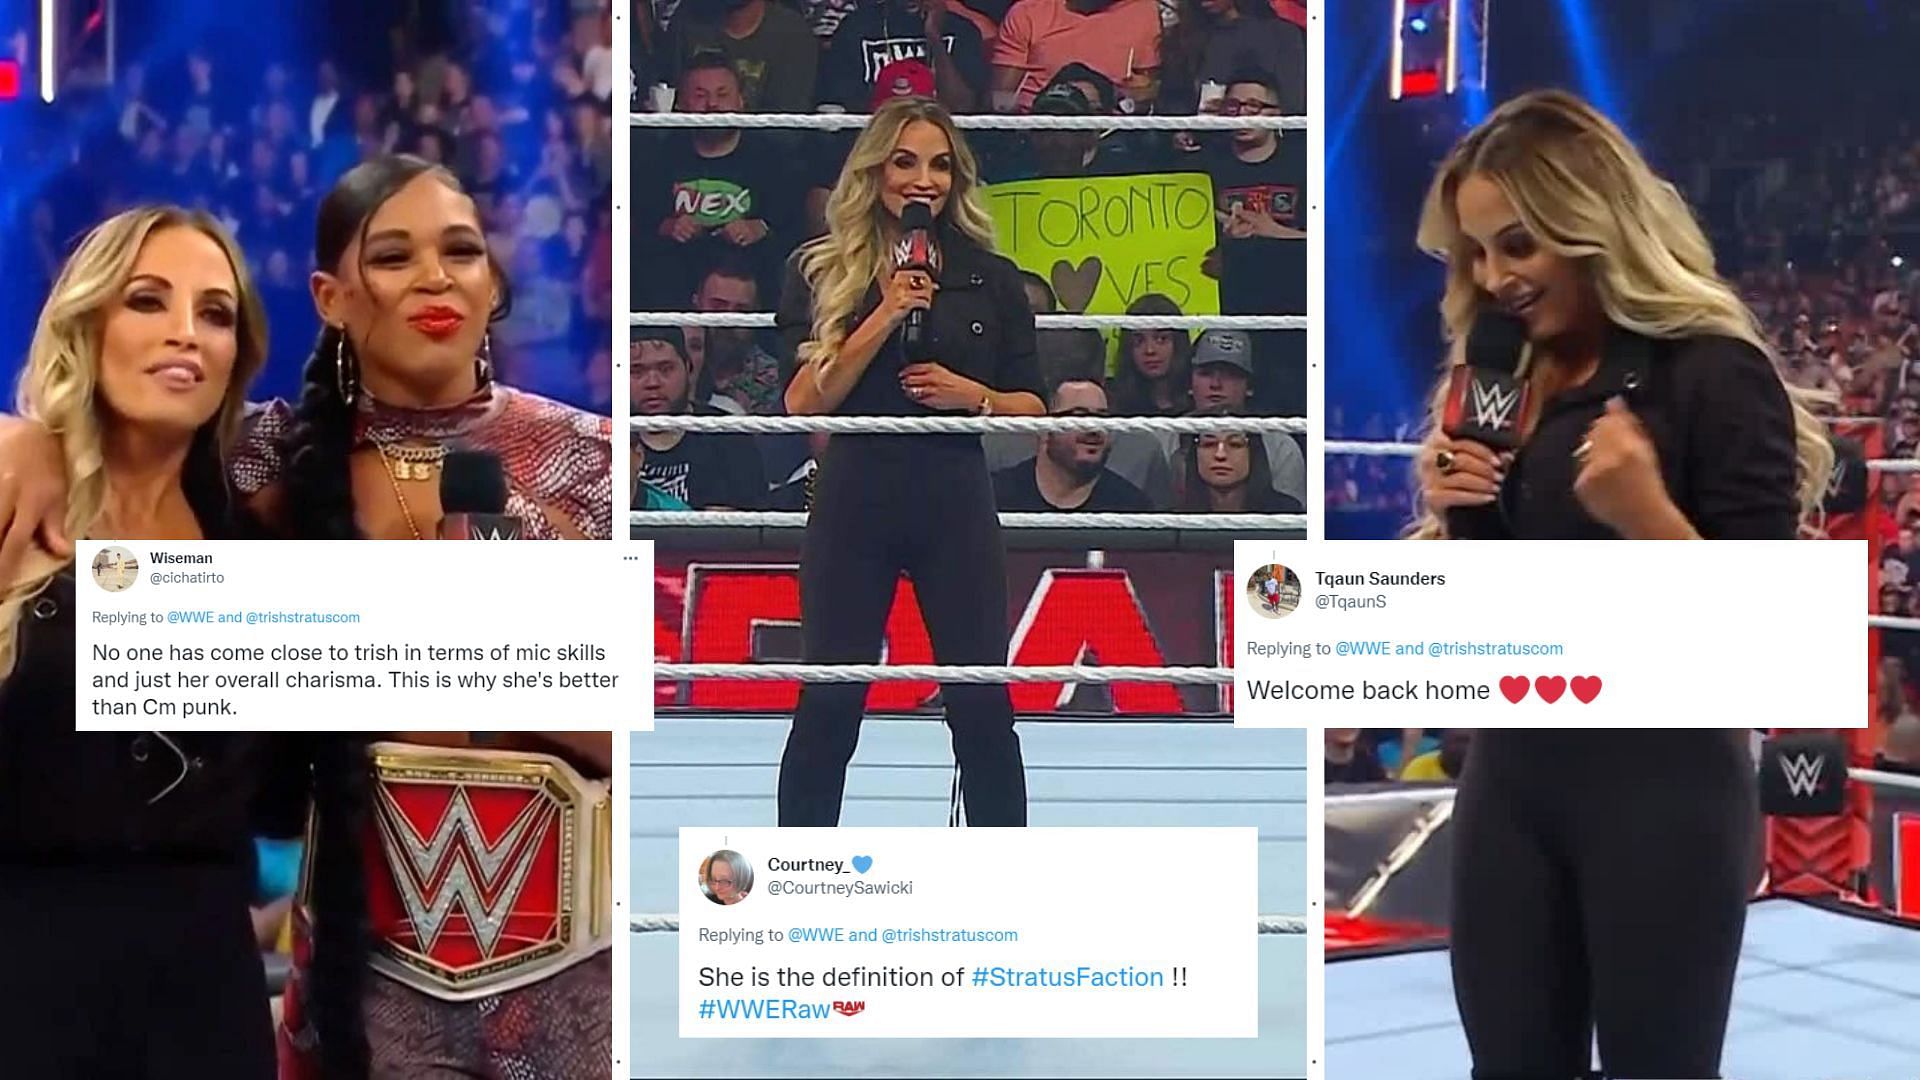 WWE Hall of Famer Trish Stratus returns to RAW for the first time in 3 years